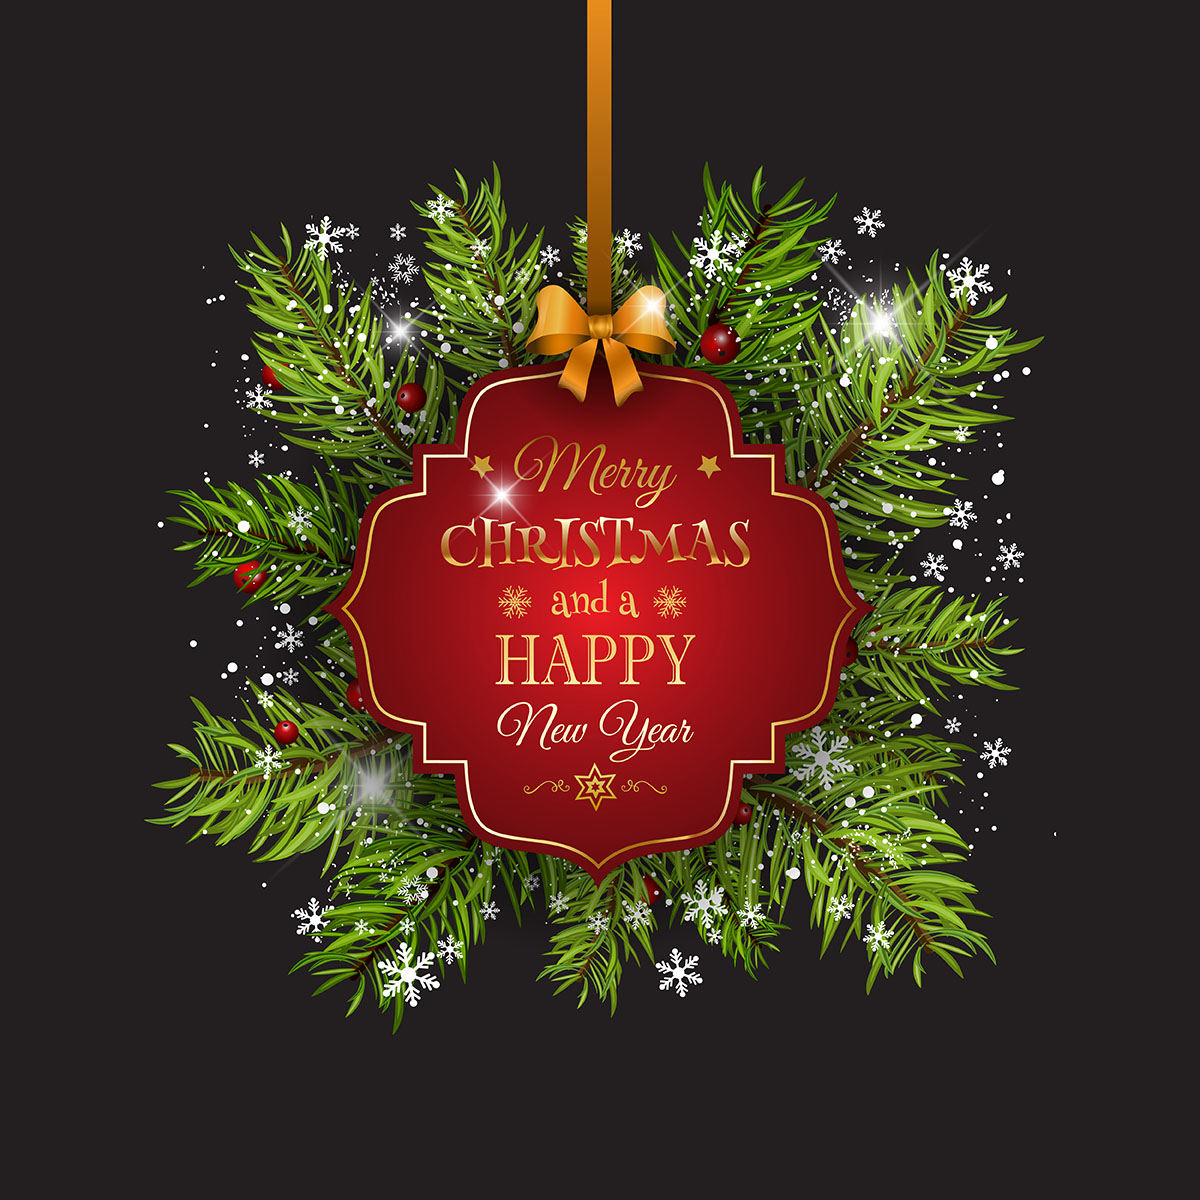 Christmas background with fir tree branches and decorative label - Download Free Vectors ...